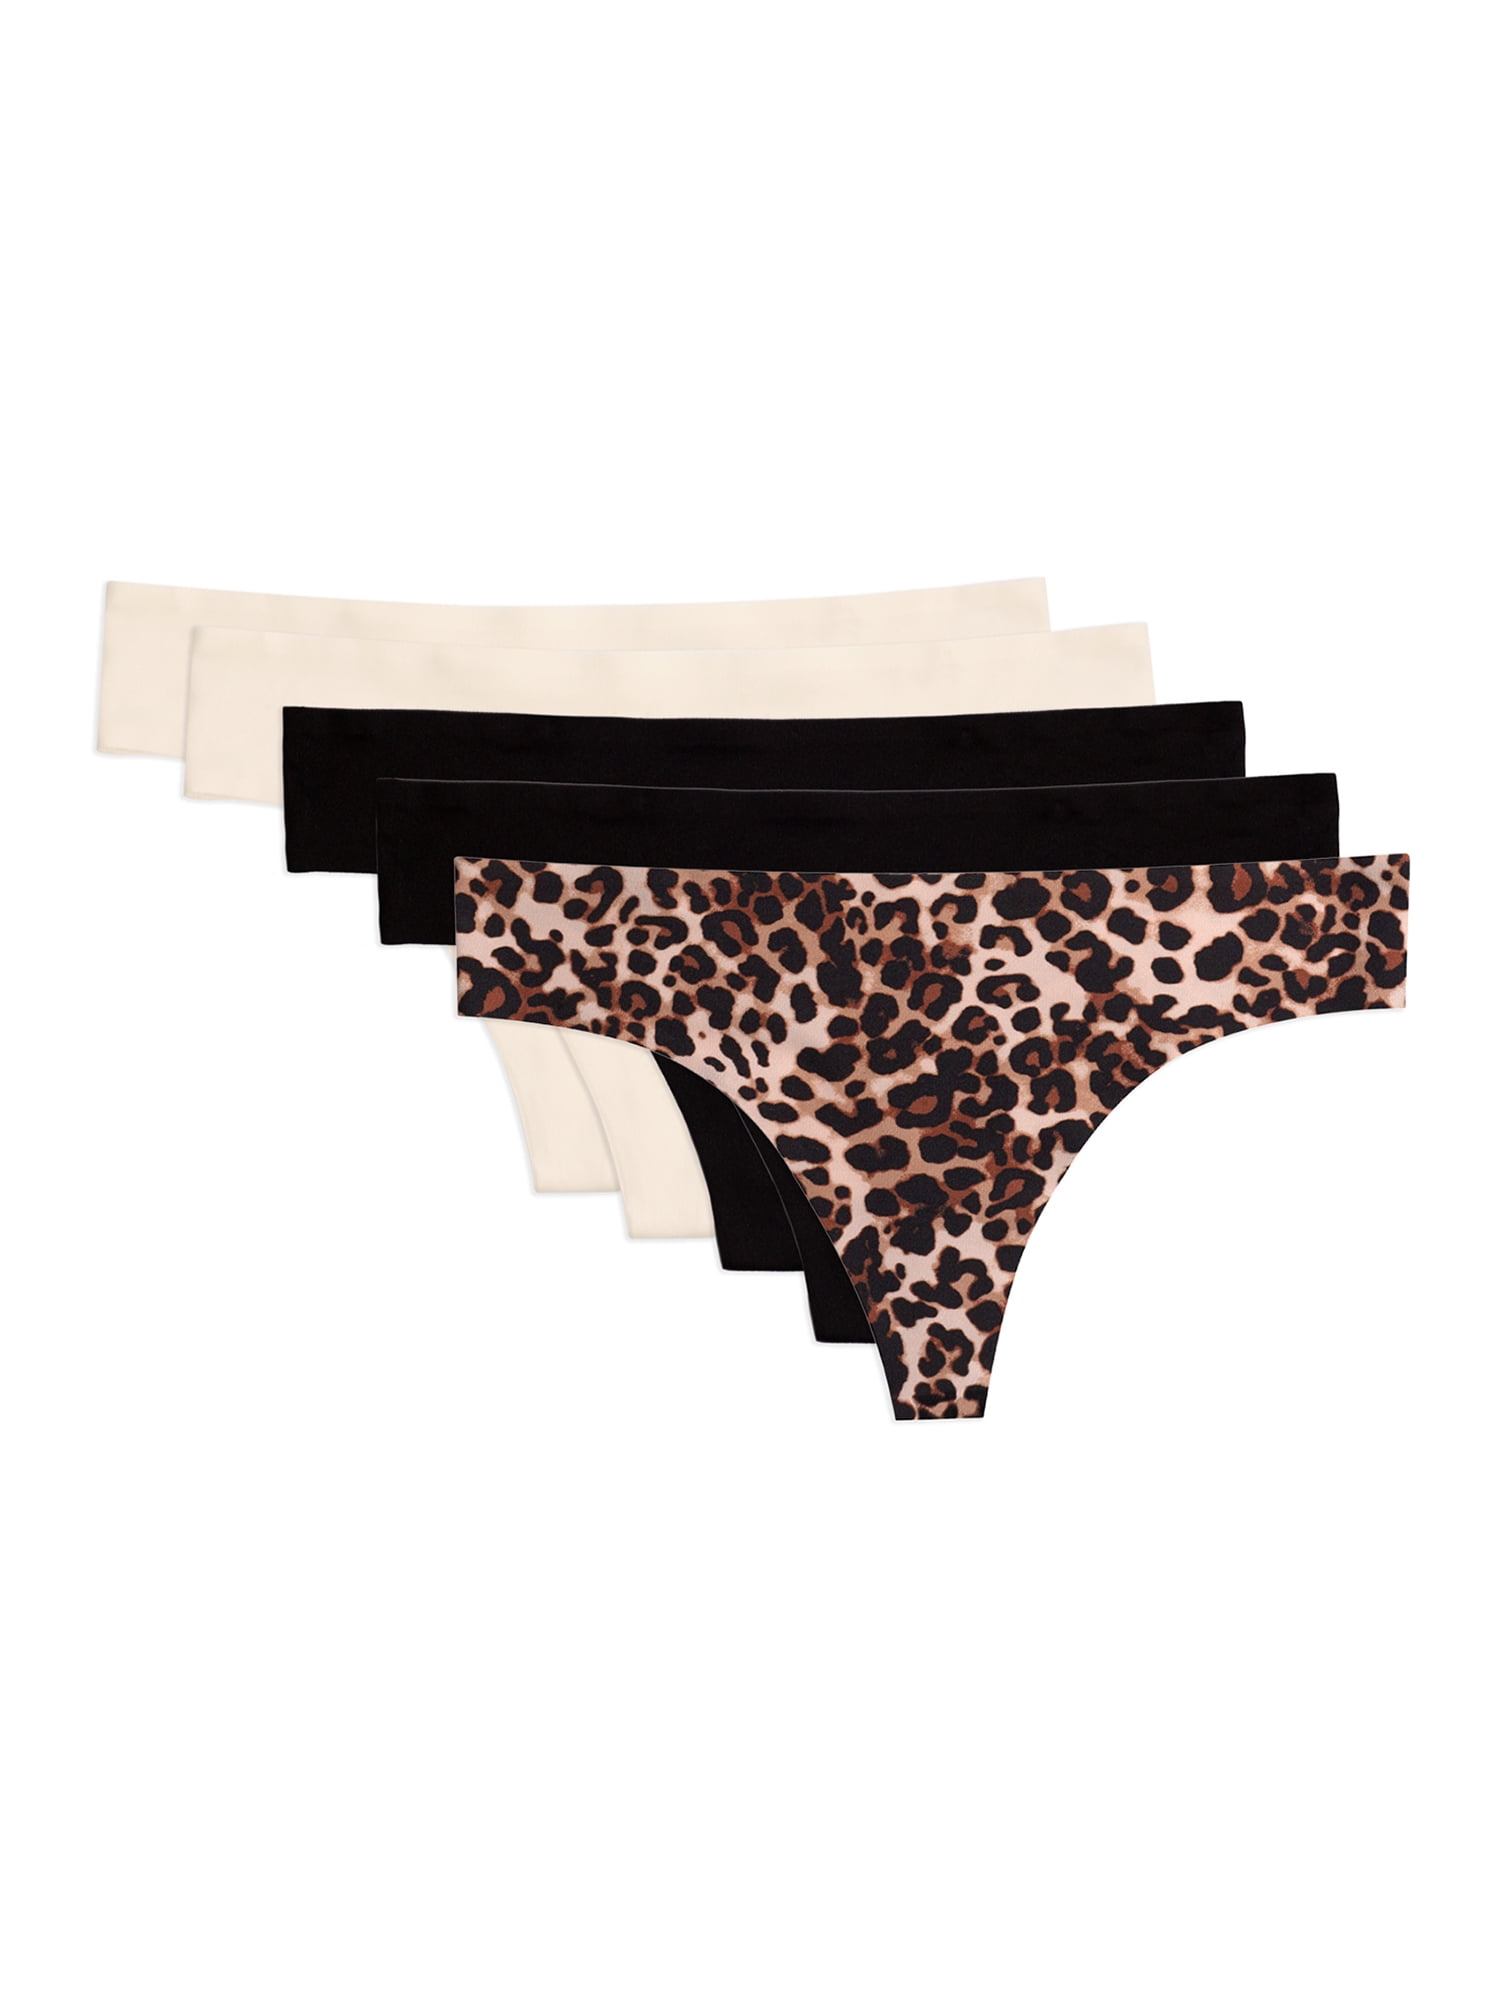 ANIMAL PRINTS or MED SIZE SM PANTIES THONGS 5 - NWT $24 6 2 FOR 1